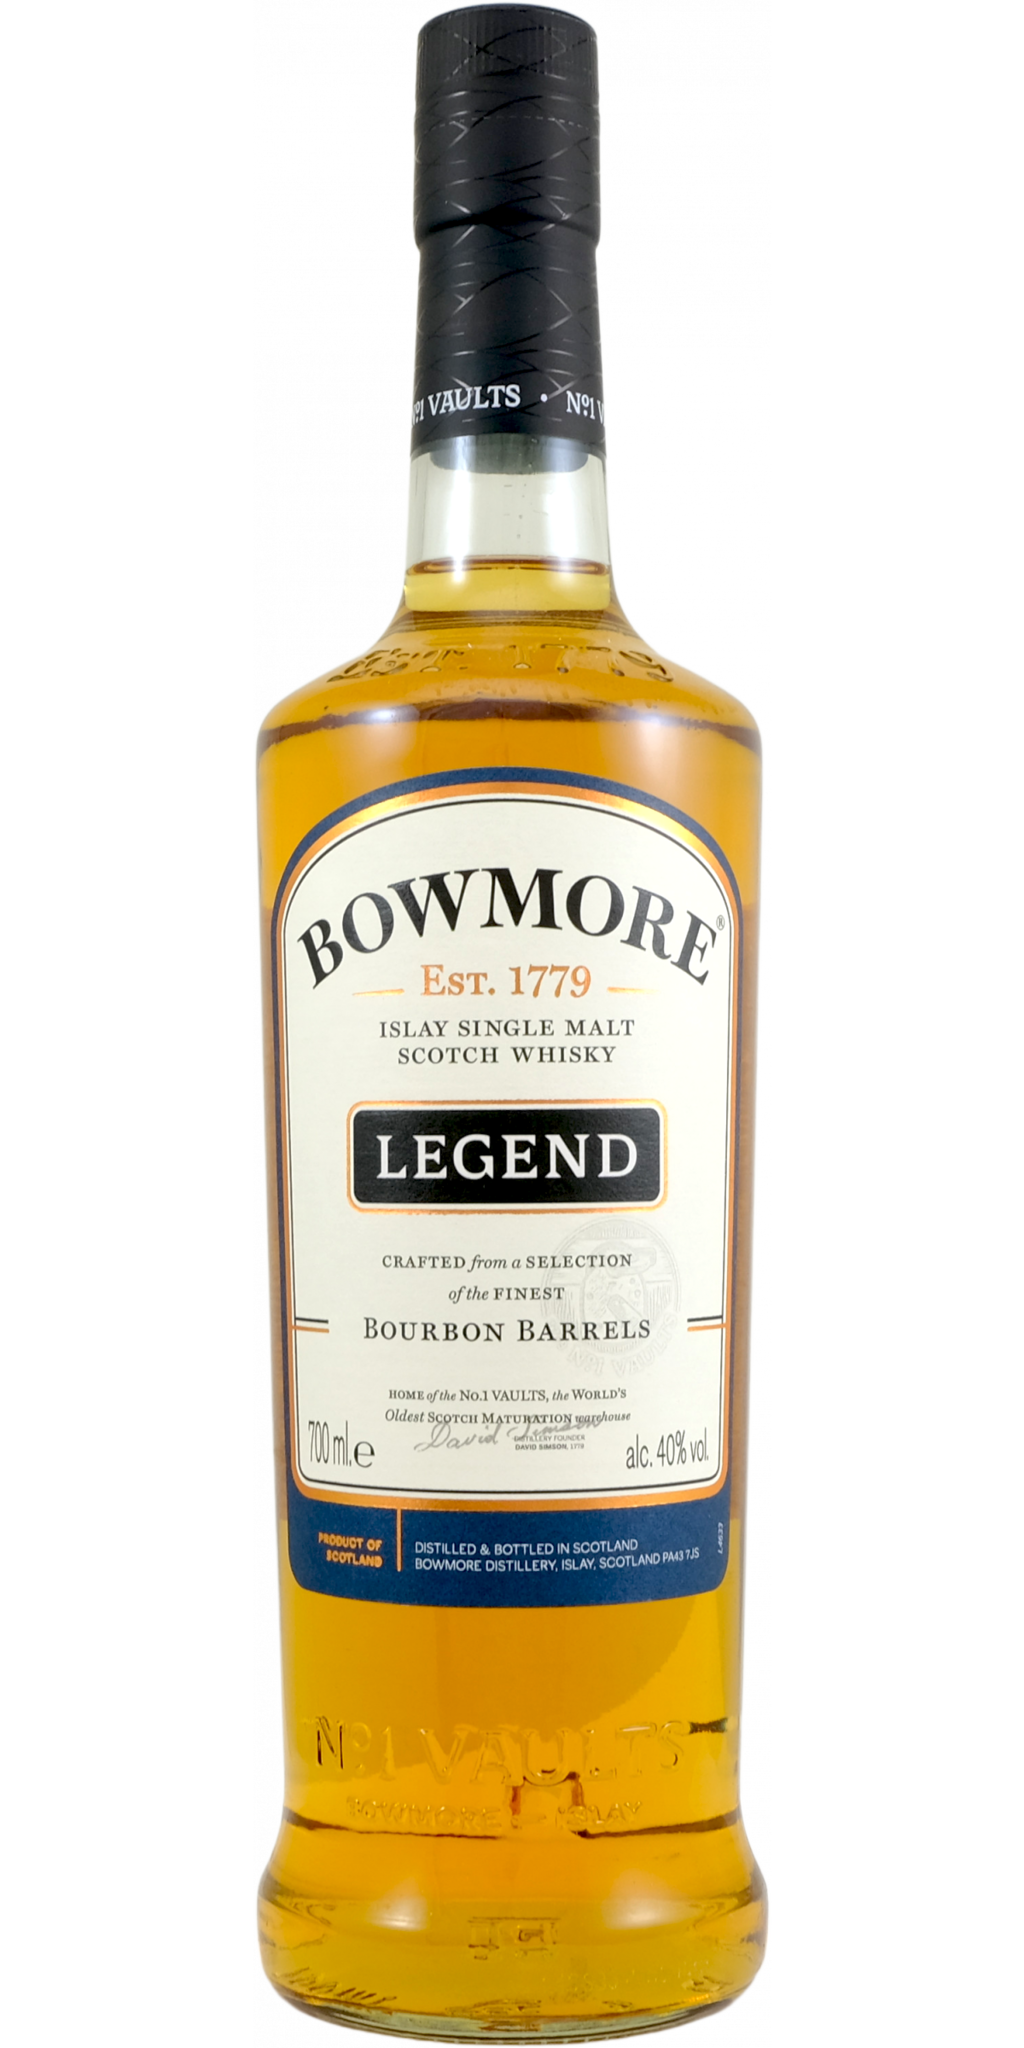 vertaling abces Inspectie Bowmore Legend - kopen | Whiskybase shop